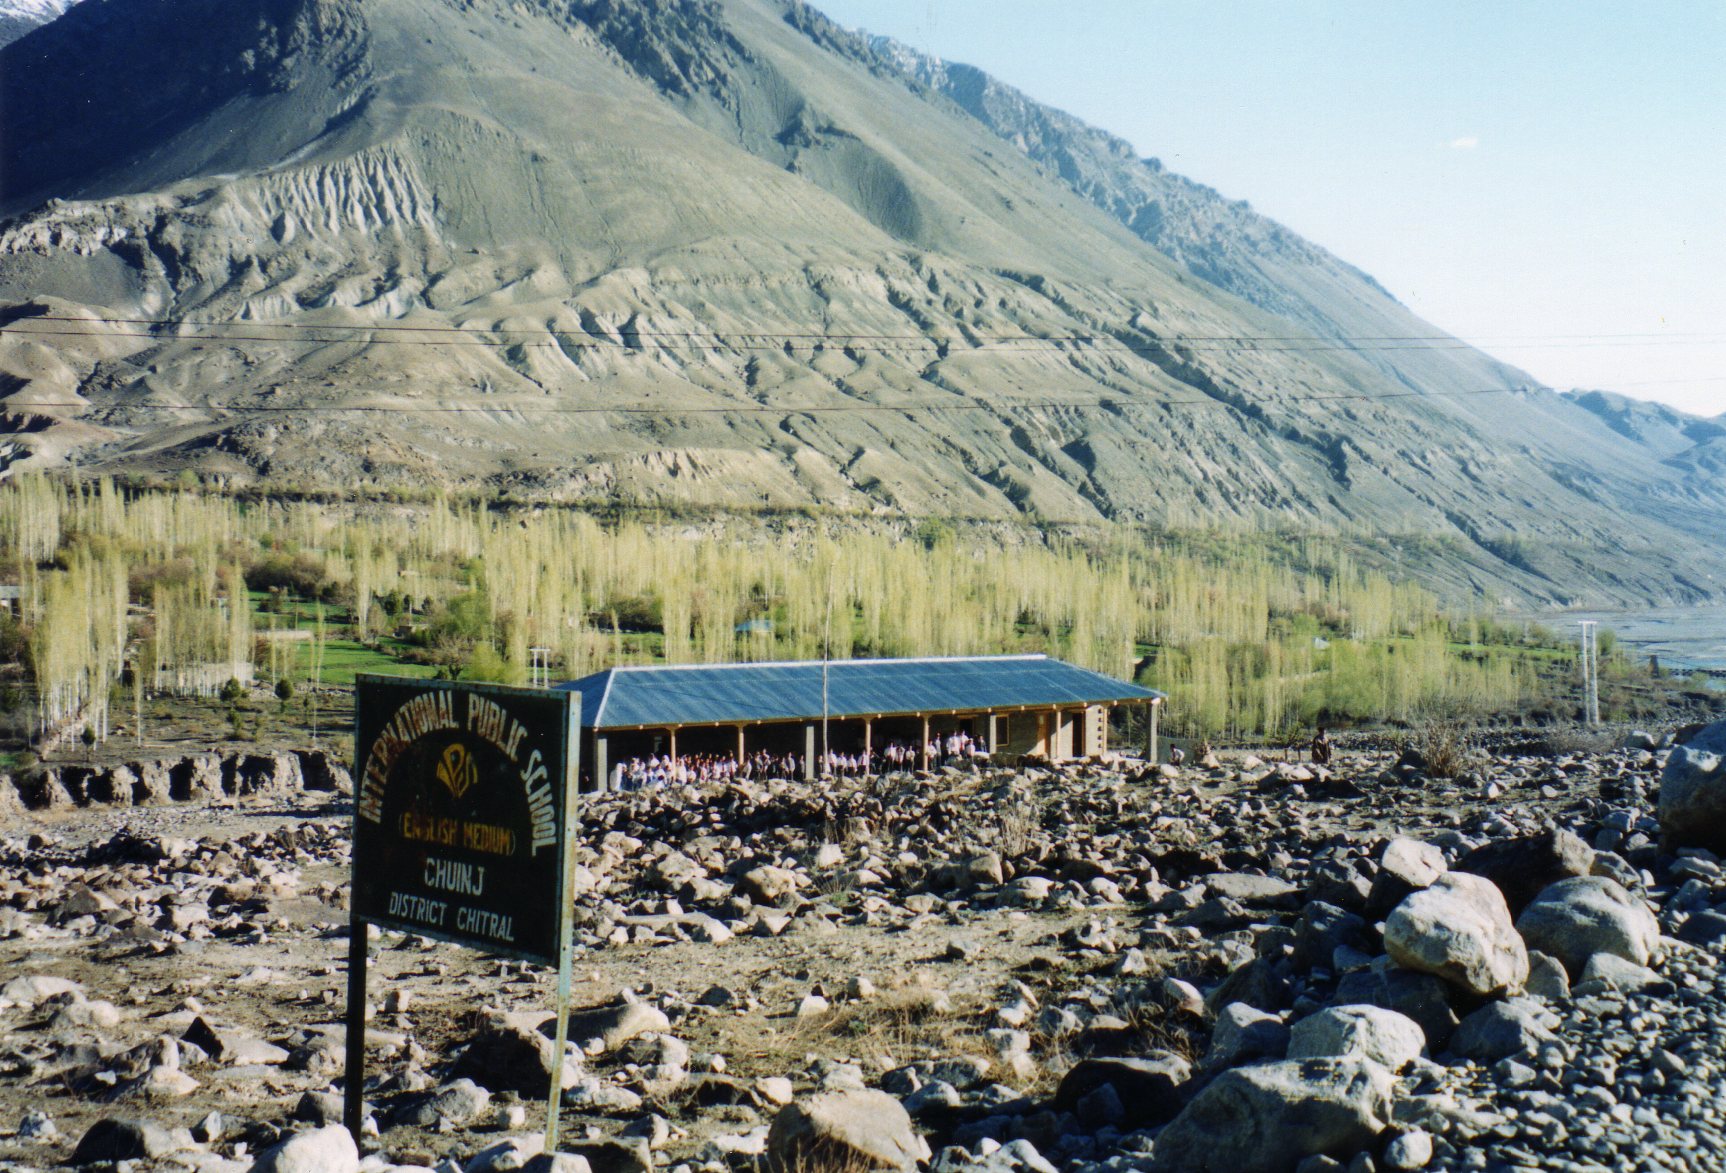 A solas assisted school in Chuini, Mastuj, District Chitral